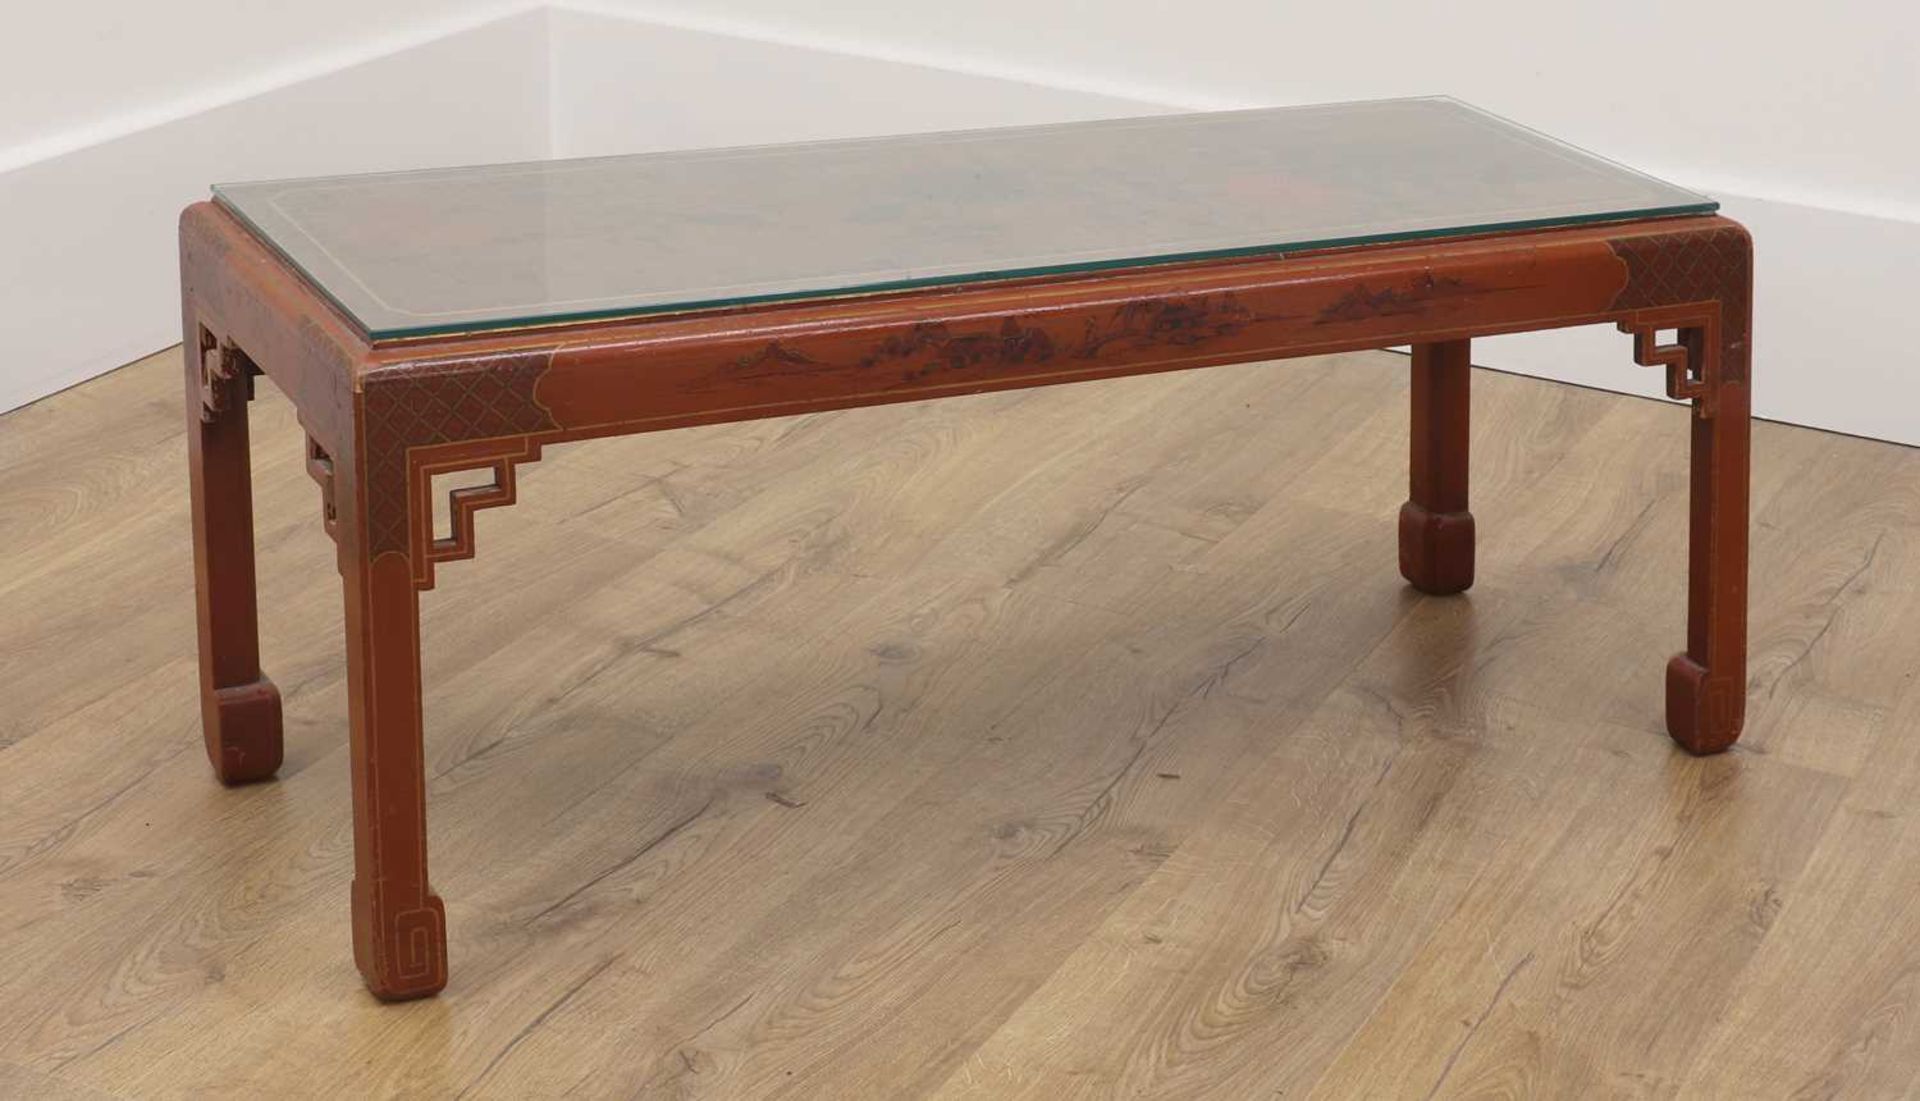 An 18th-century-style red lacquer low coffee table, - Image 3 of 4